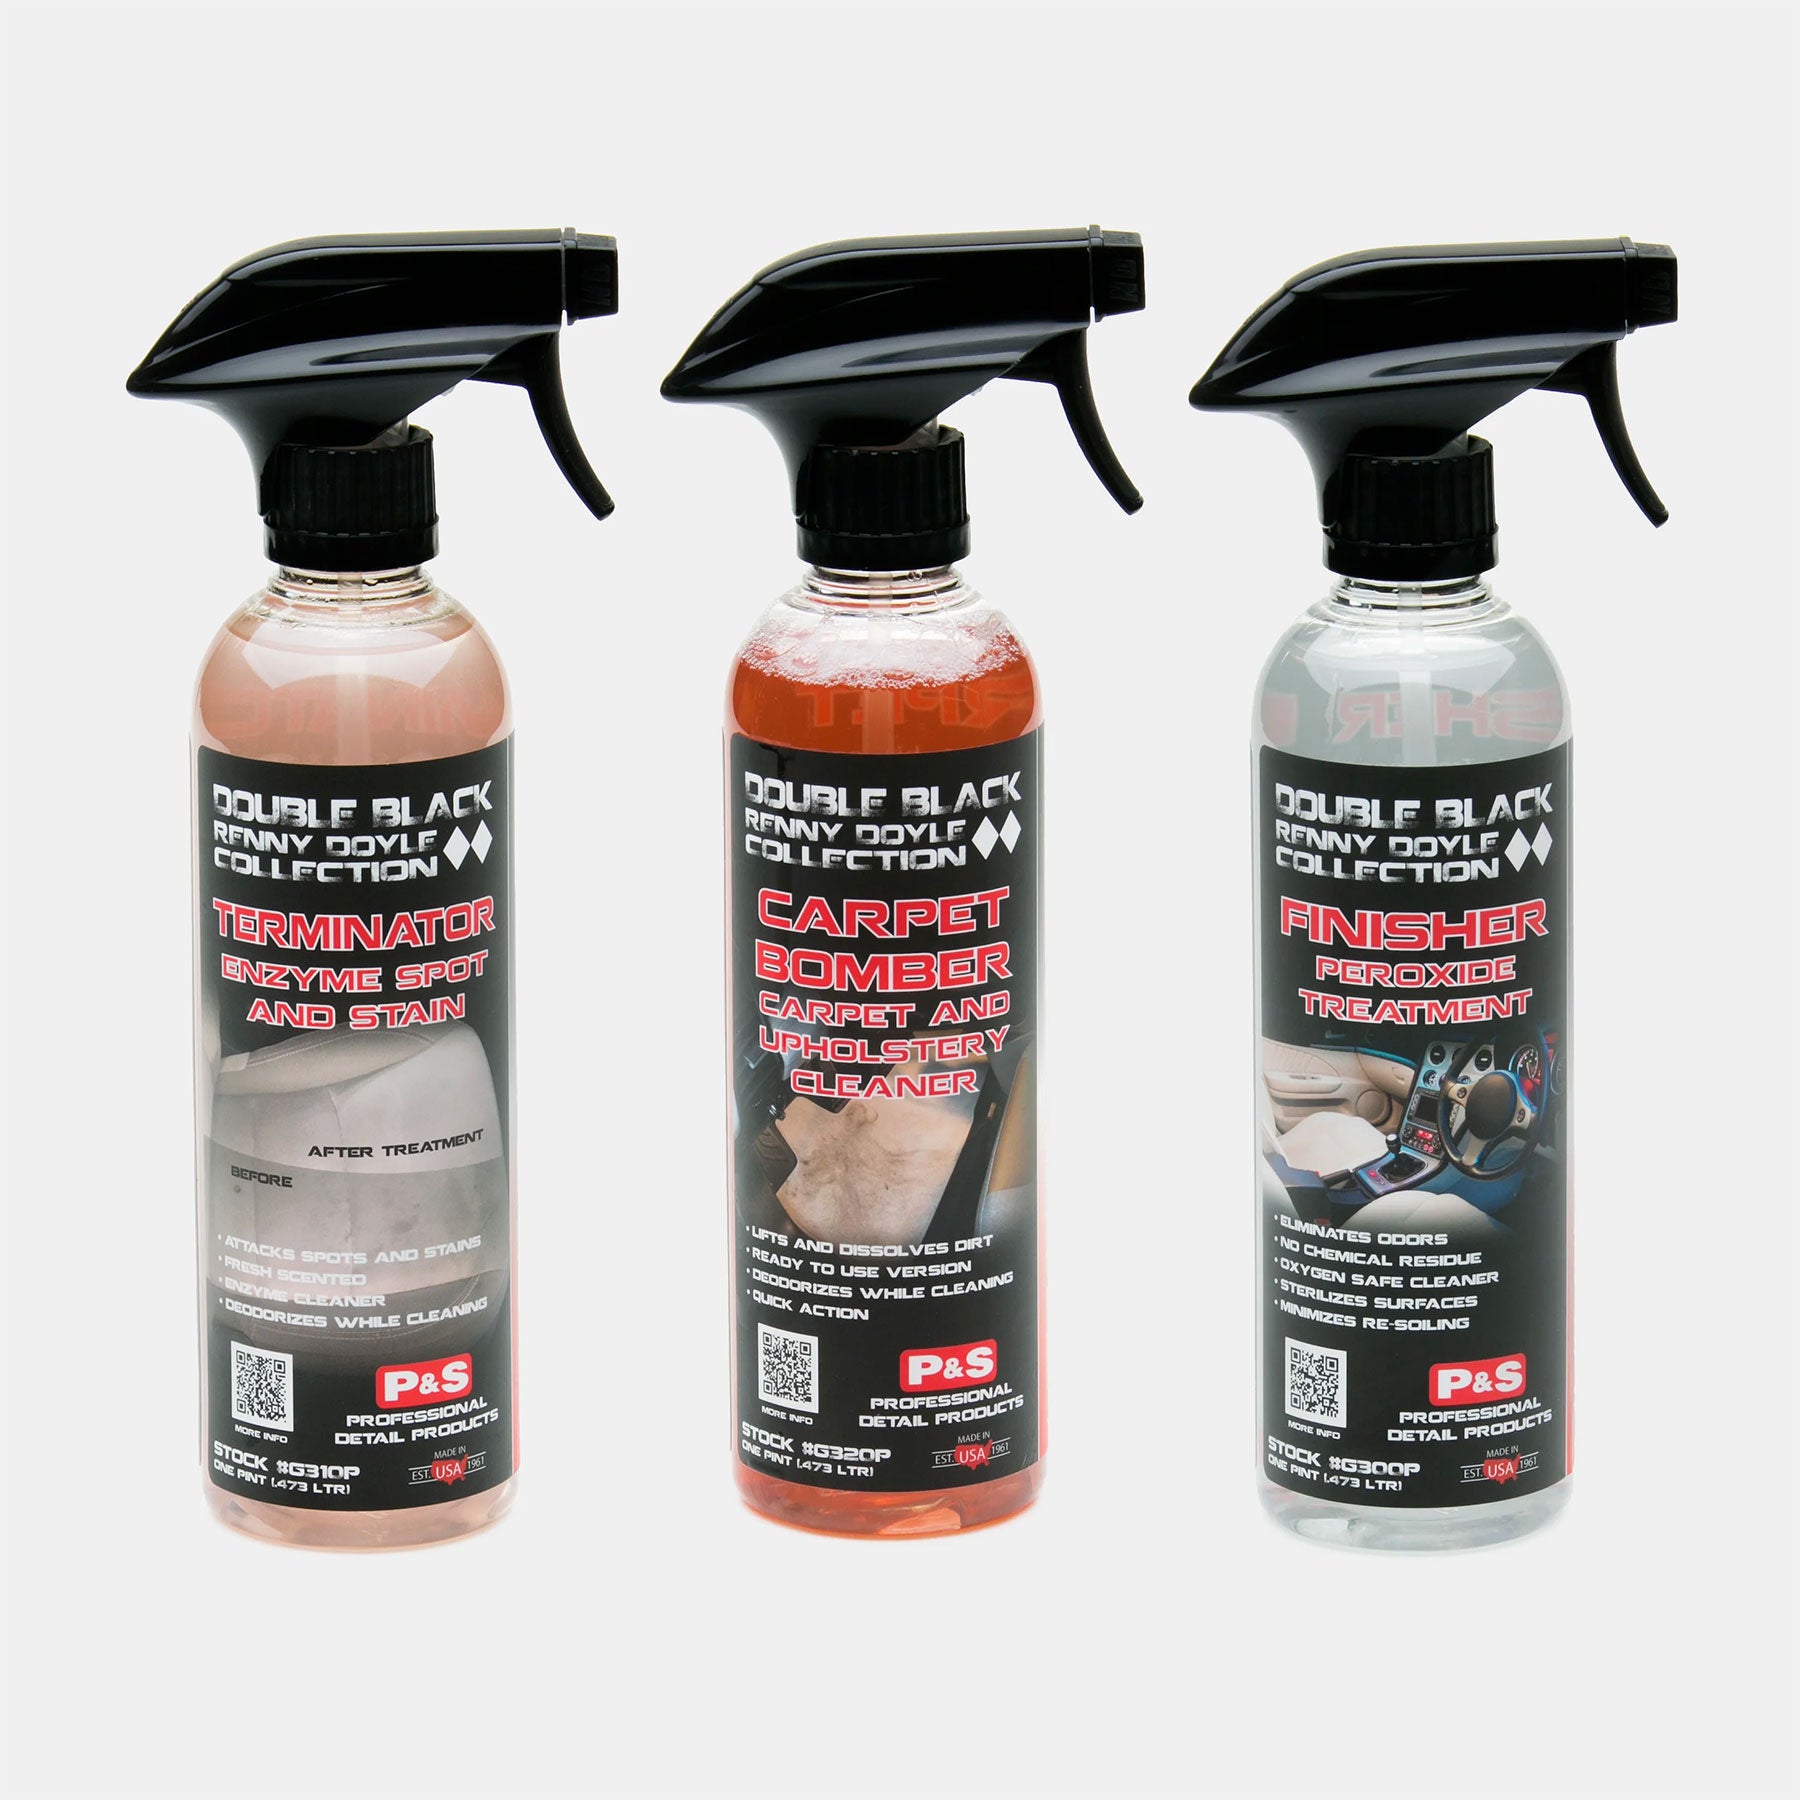 P & S Double Black Xpress Interior Cleaner Vs. Adam's Polishes and Chemical  Guys Compareison Review 